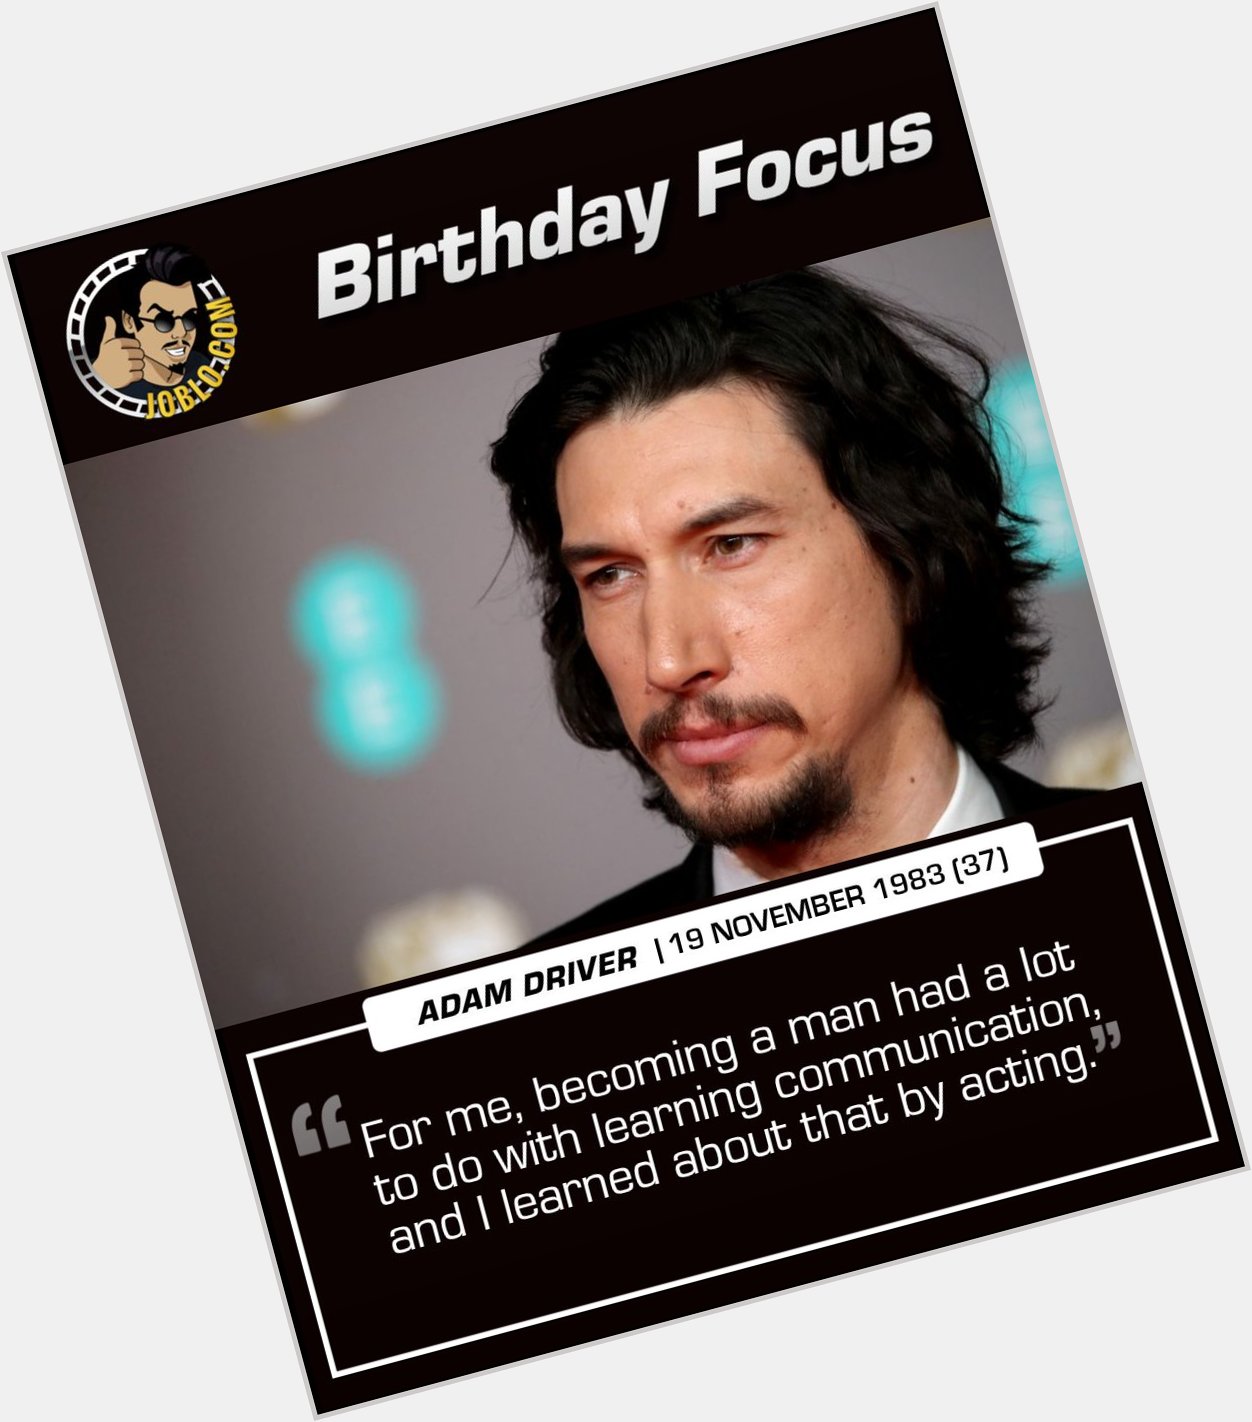 Wishing Adam Driver a very happy 37th birthday!

What do you think is his best performance? 